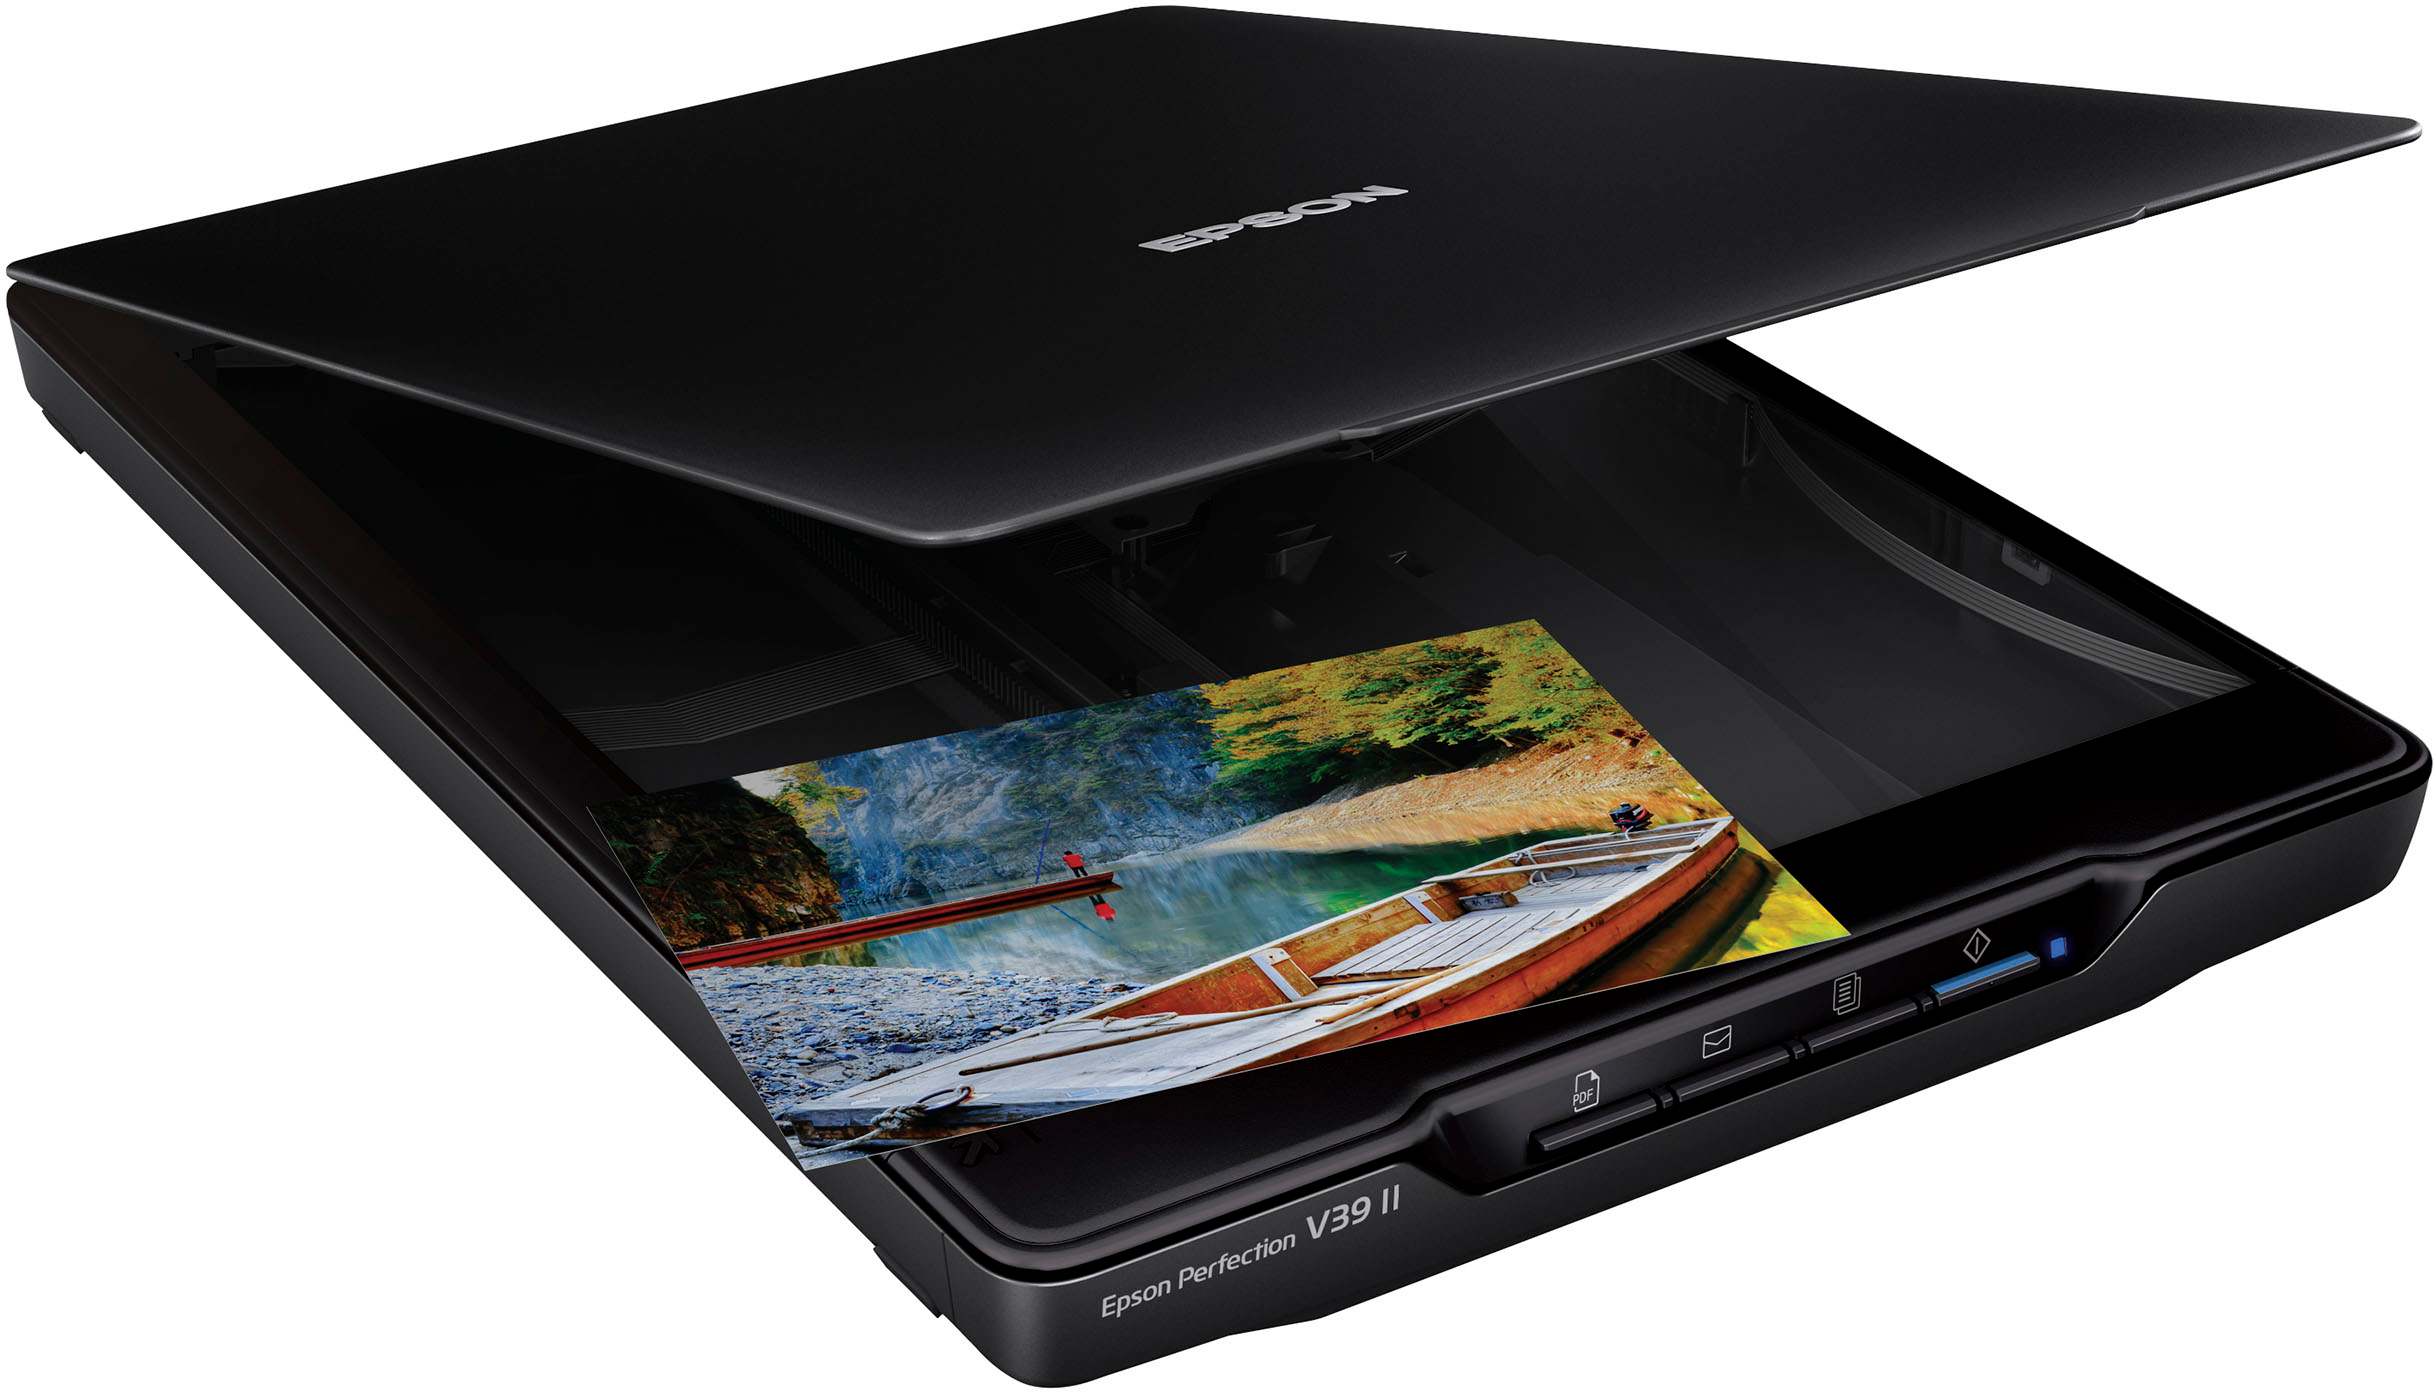 Angle View: Epson - Perfection V39 II Color Photo and Document Flatbed Scanner